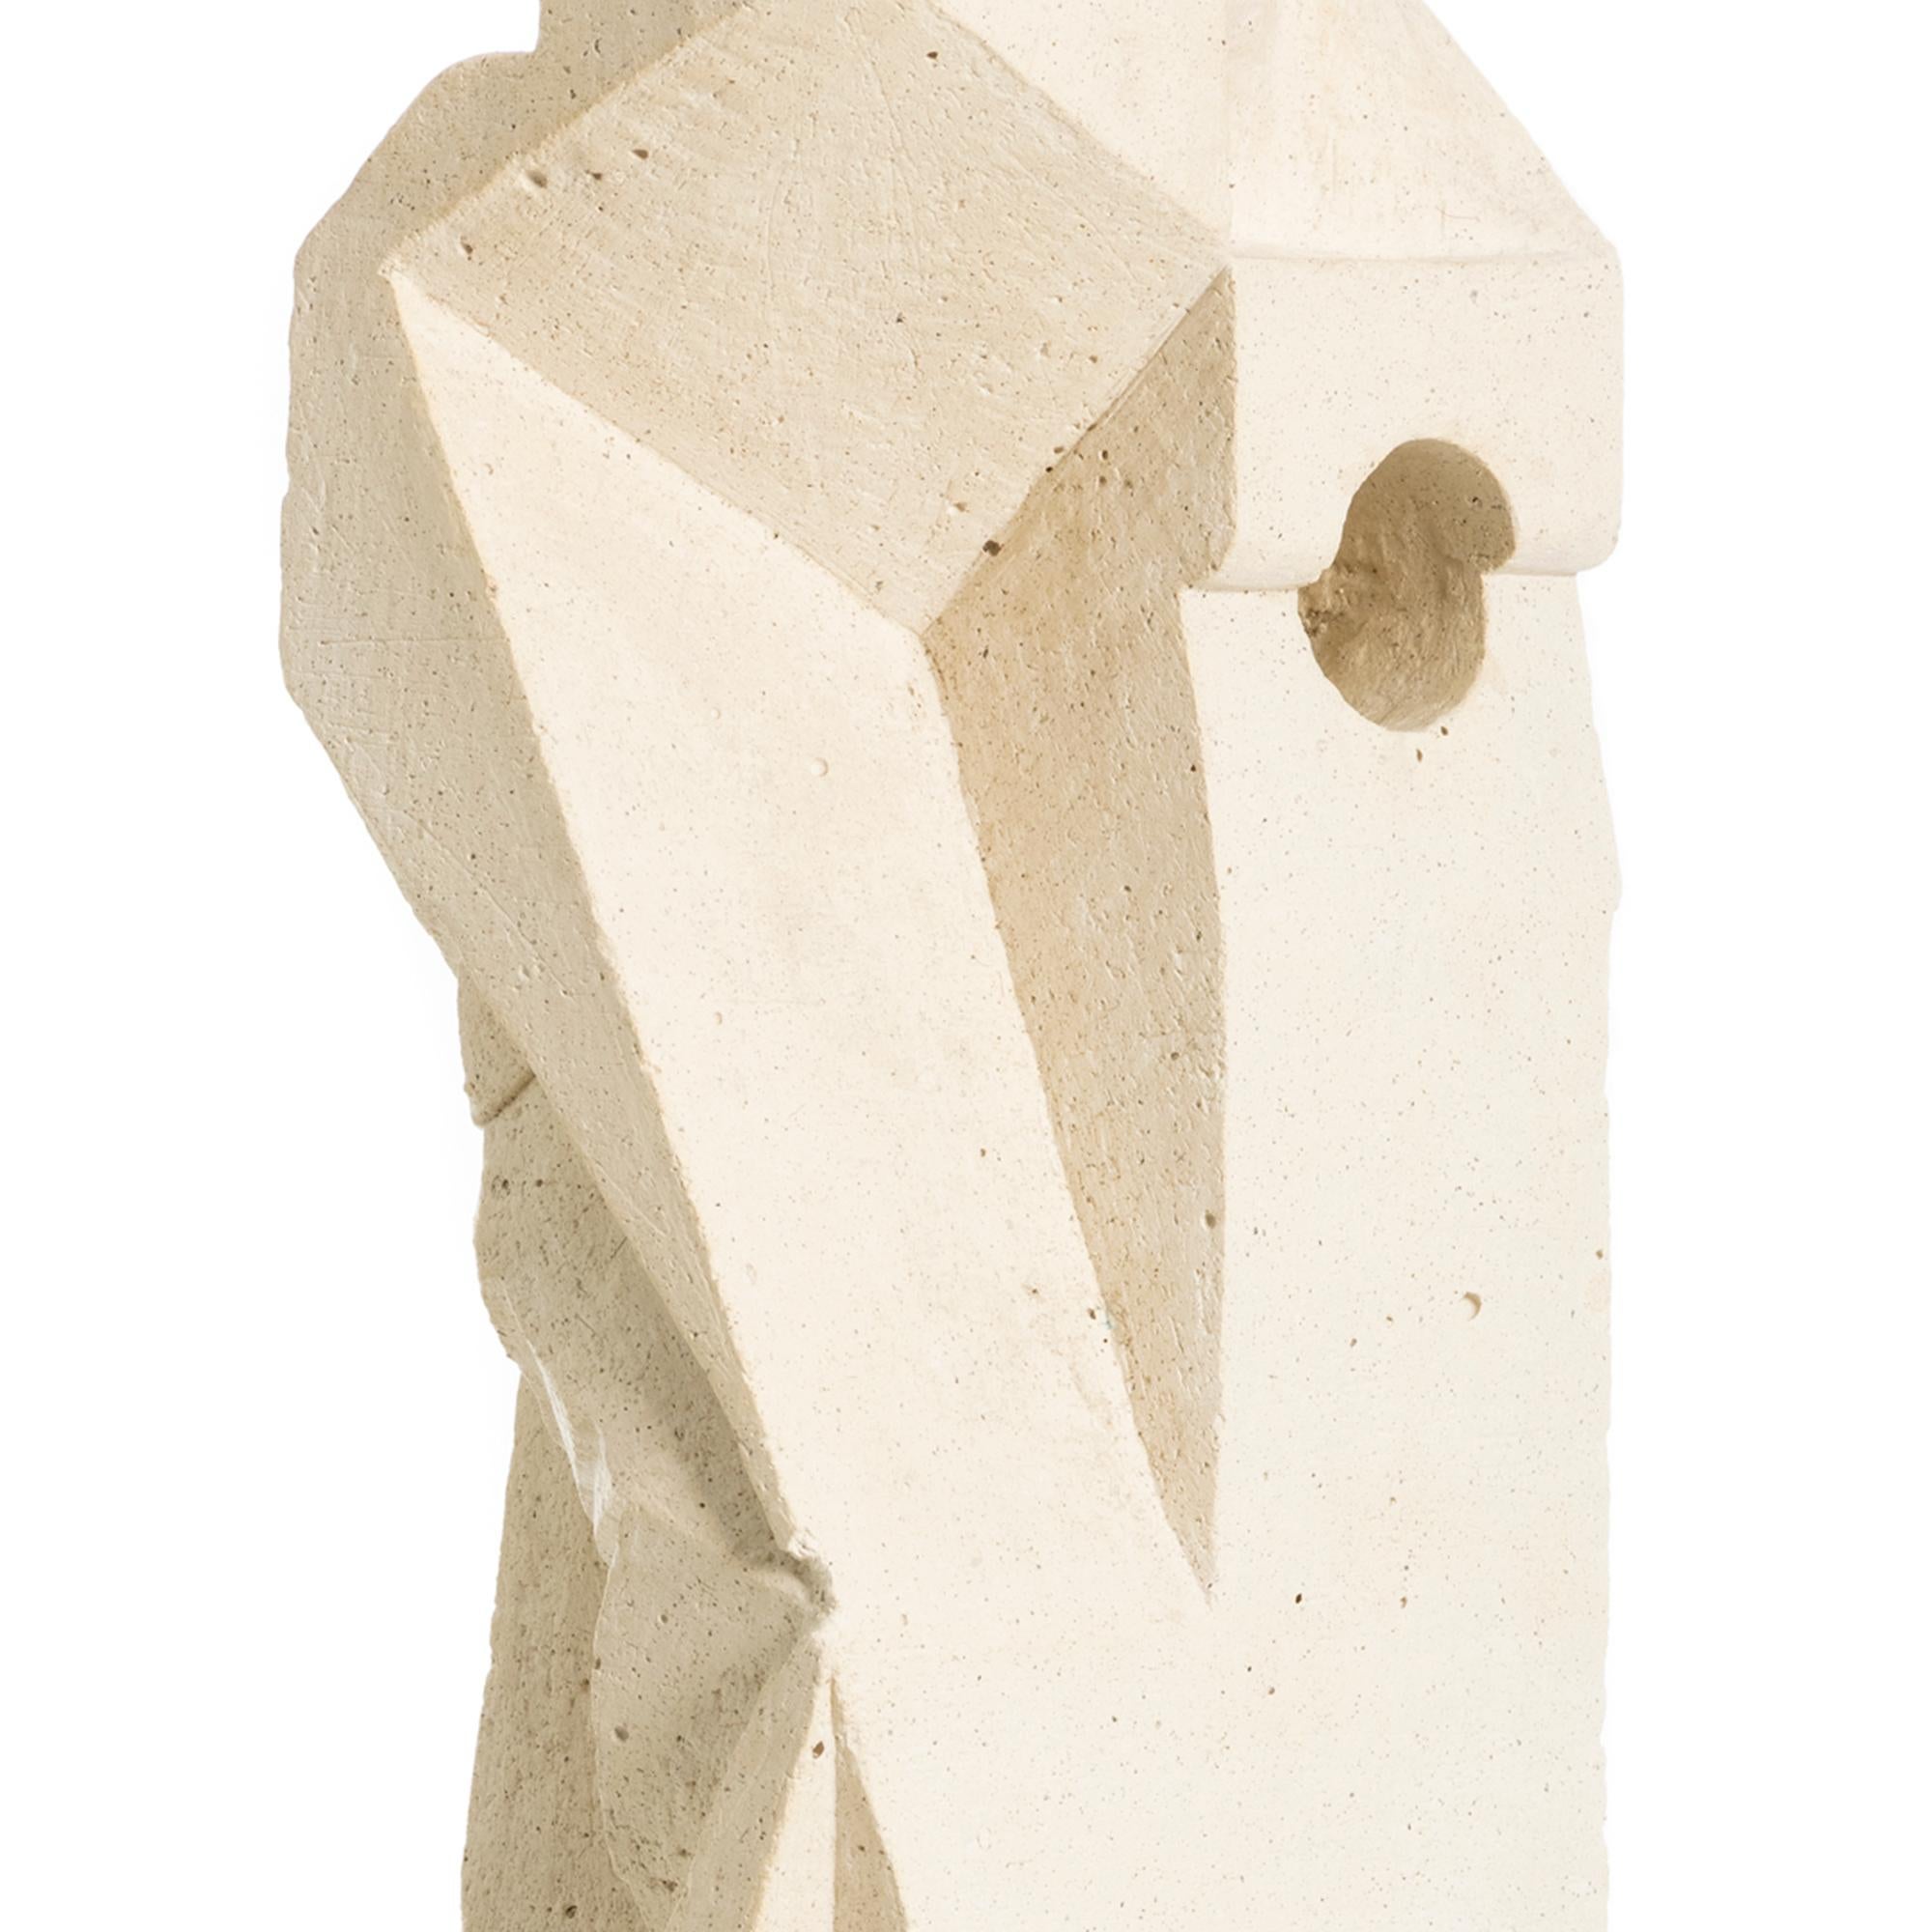 Modern Geometric Clay Scuplture from the 70s